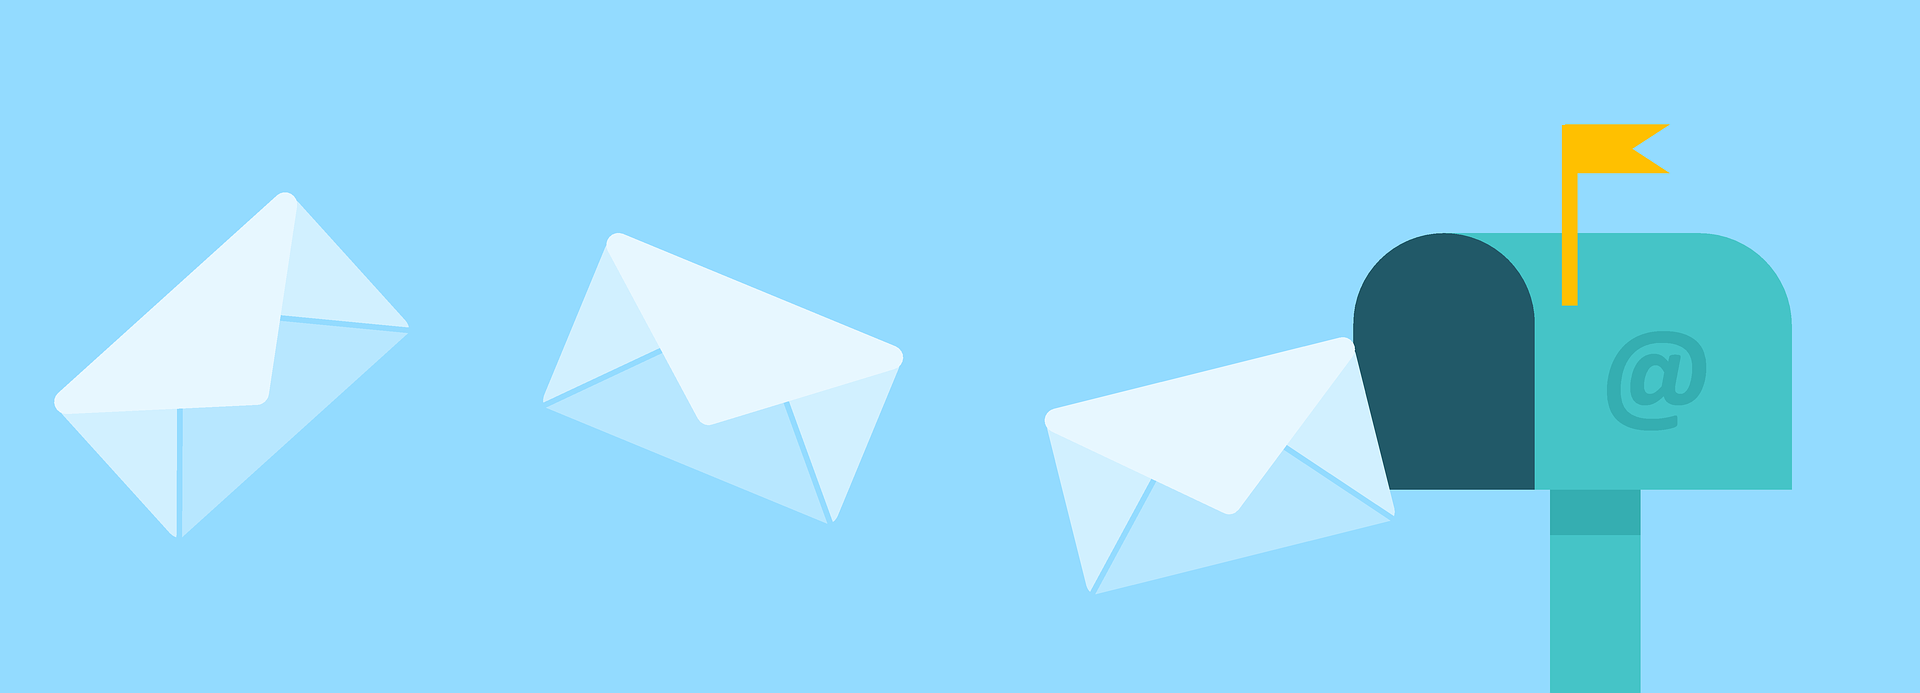 HubSpot Email Marketing: 5 Best Practices featured image